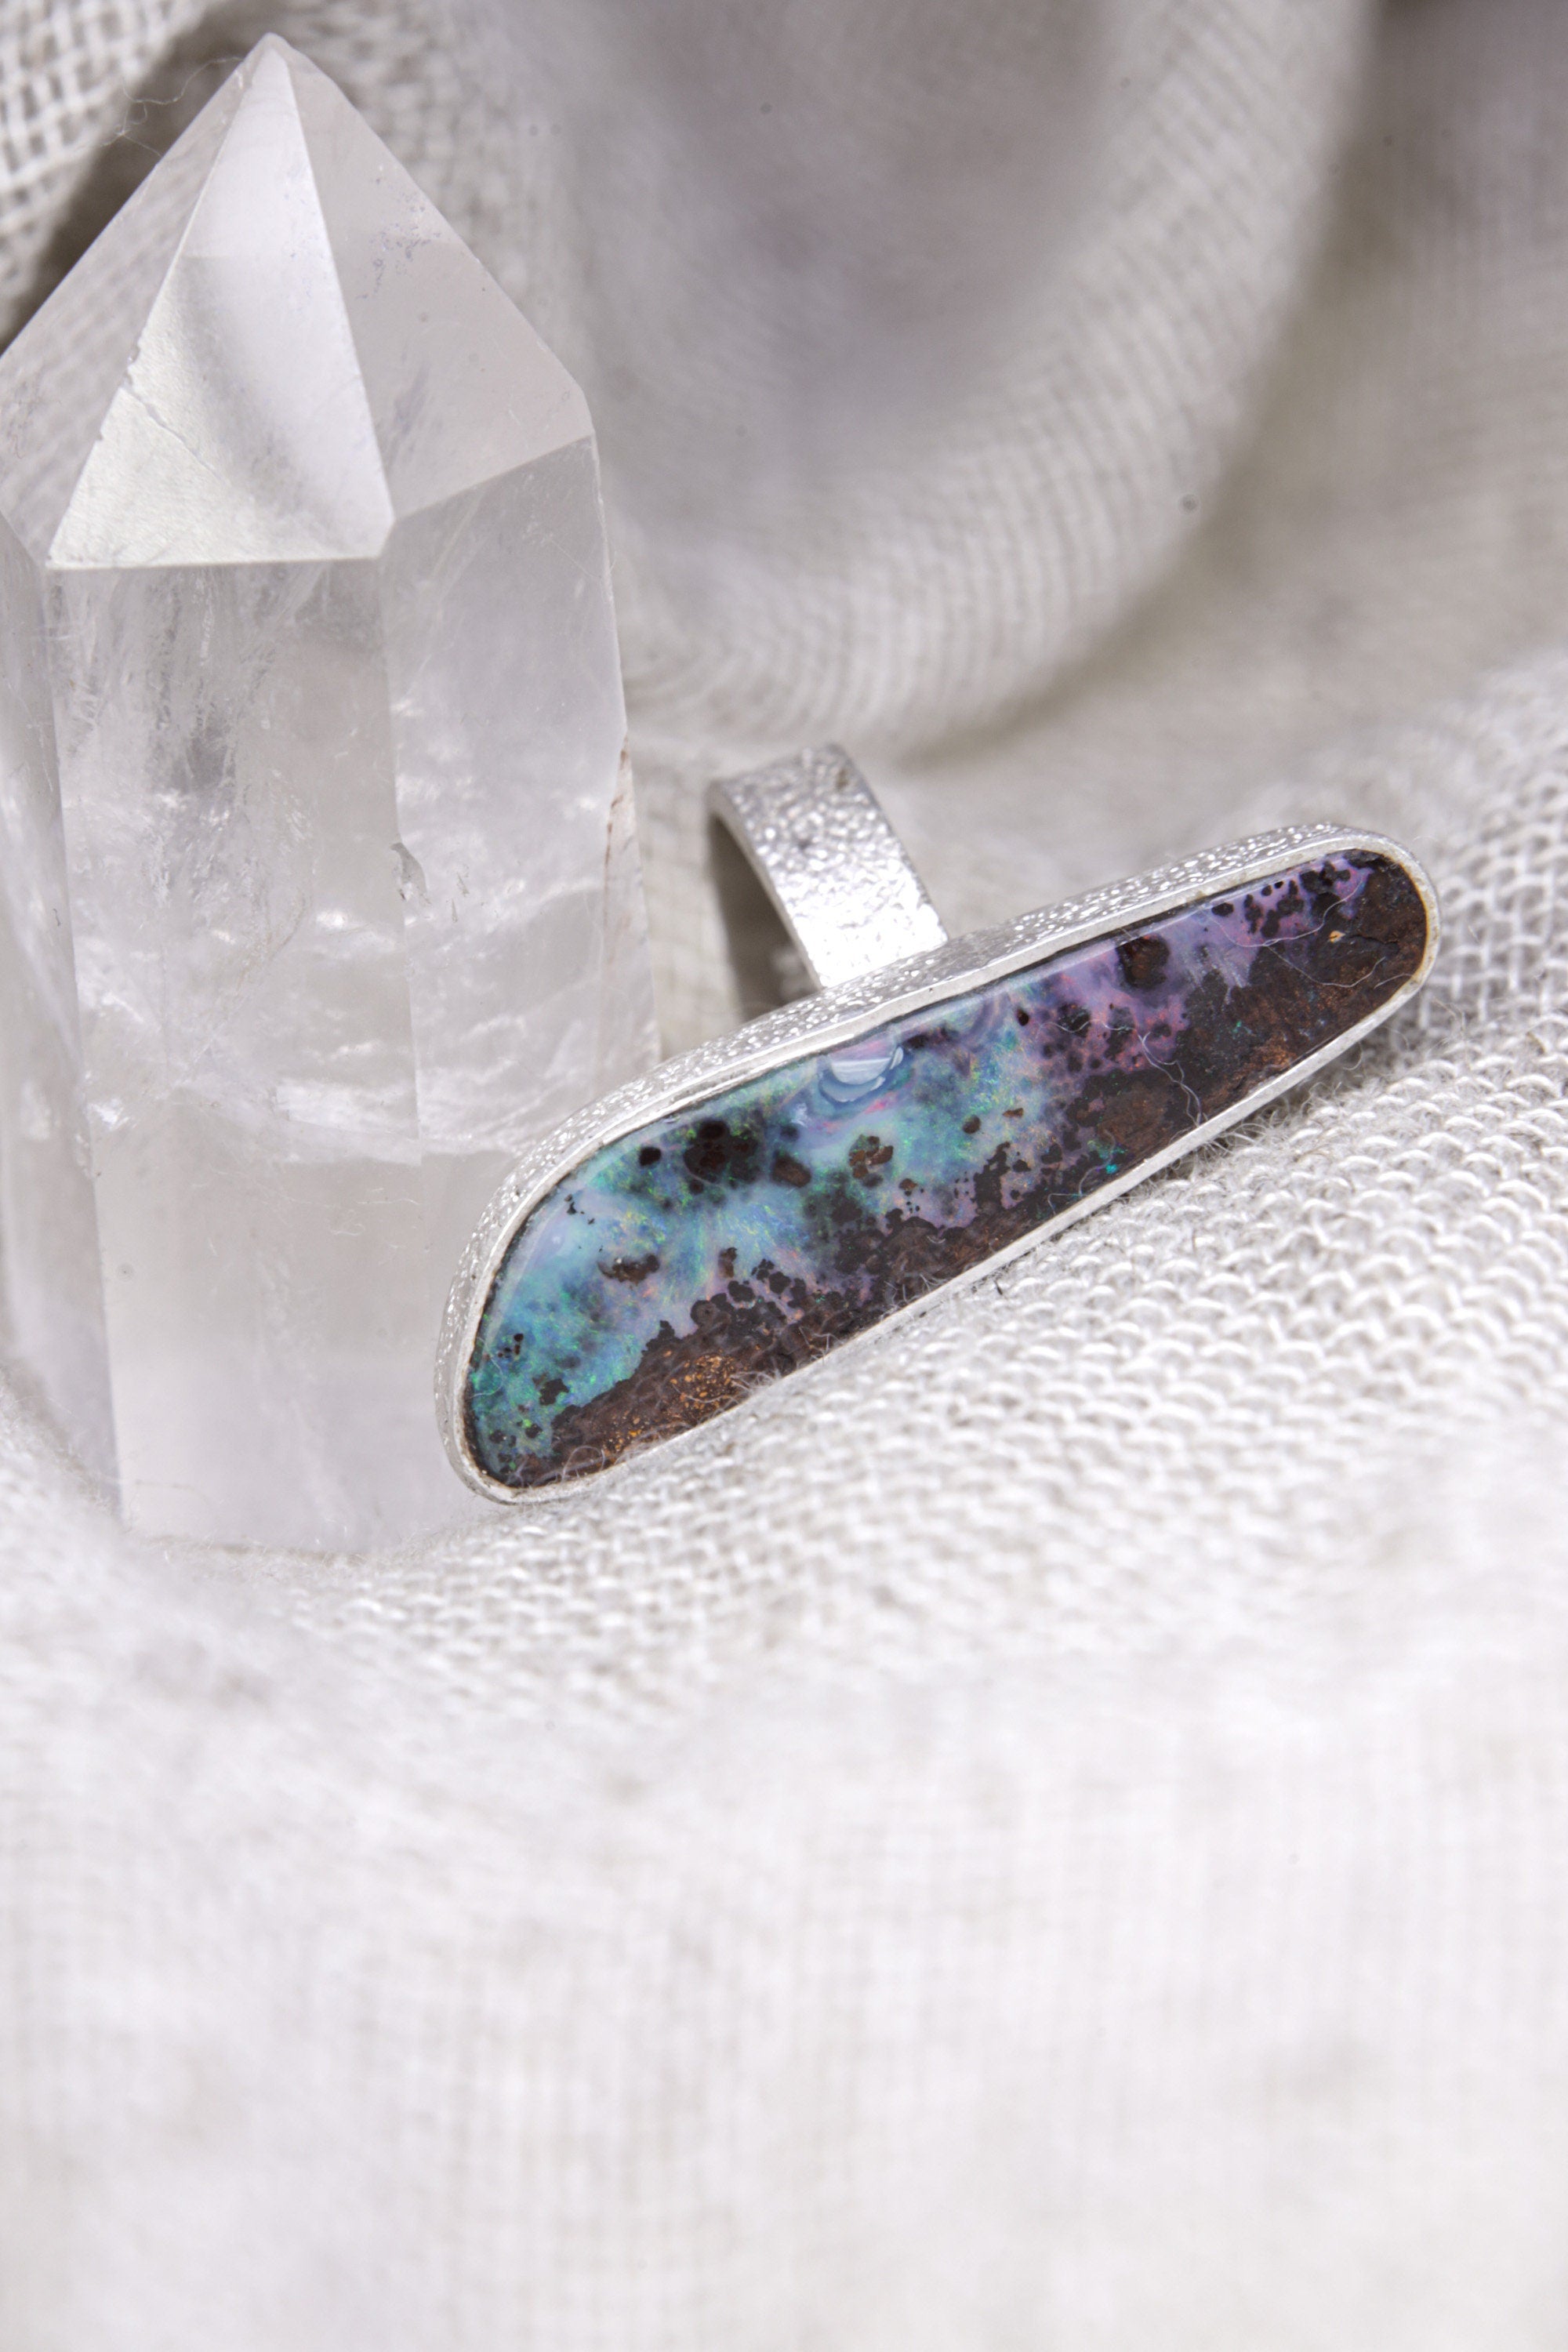 Ethereal Light Opal: Adjustable Sterling Silver Ring with Opal - Textured - Unisex - Size 5-10 US